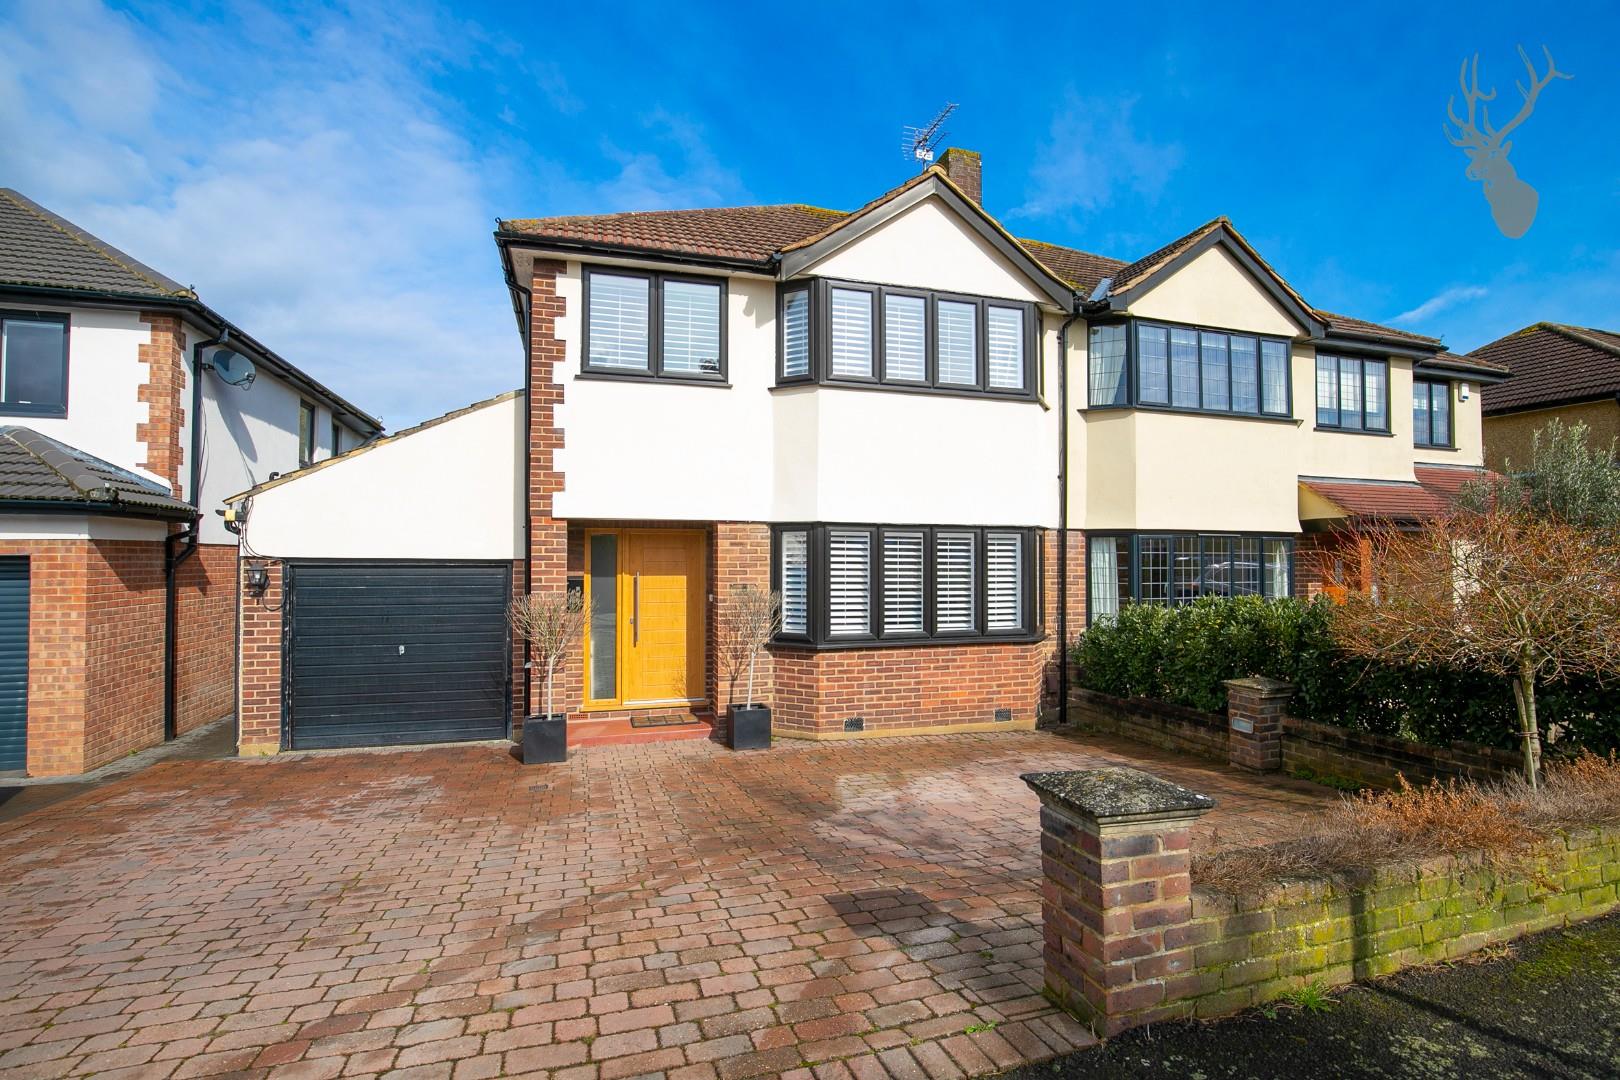 Similar Property: House - Semi-Detached in Theydon Bois